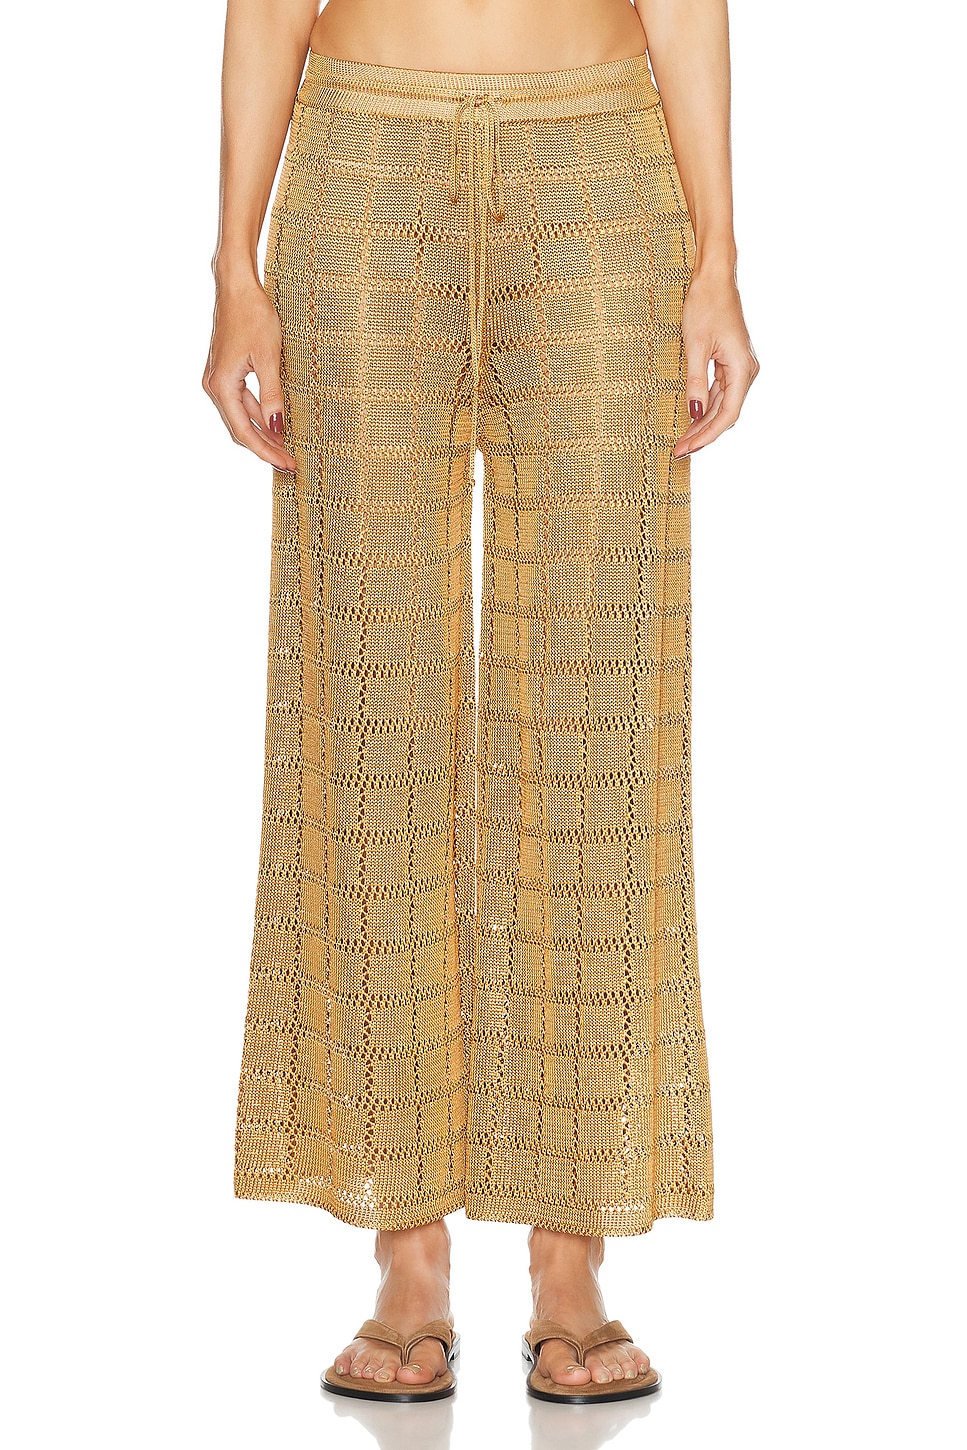 Image 1 of Calle Del Mar Crochet Patchwork Pant in Camel